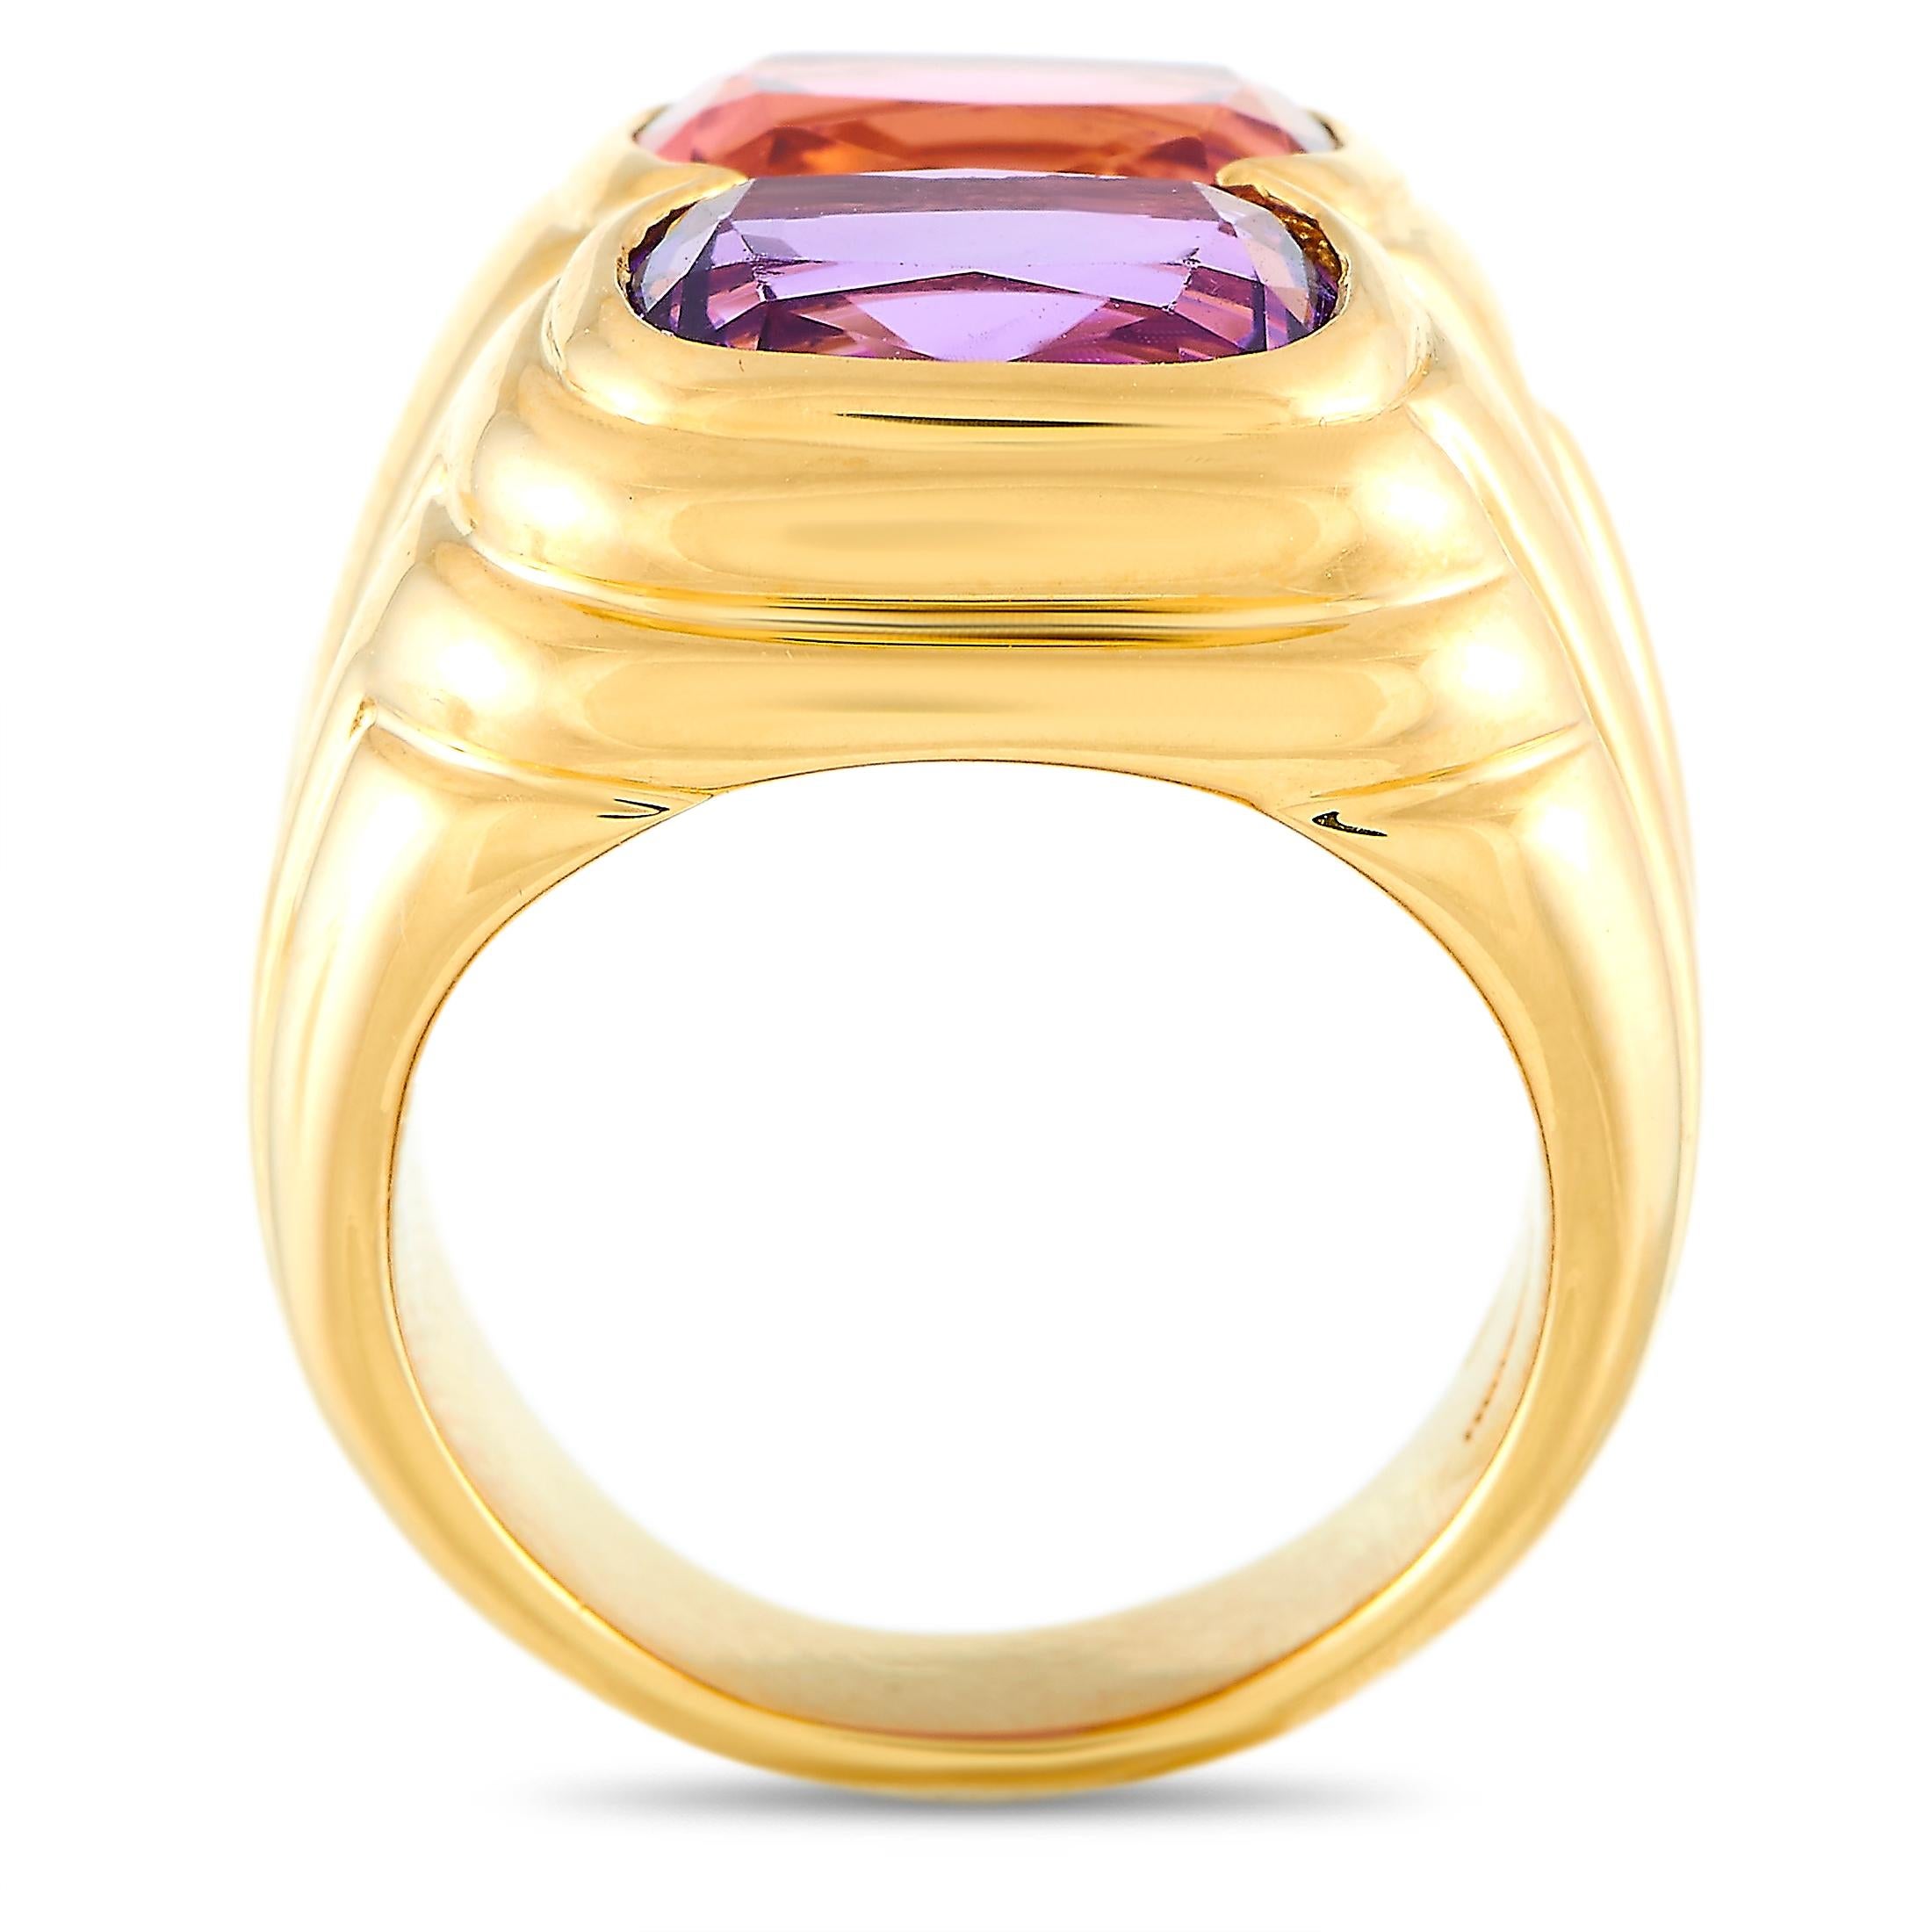 The Bvlgari “Doppio” ring is crafted from 18K yellow gold and set with an amethyst and a tourmaline. The ring weighs 20.9 grams and boasts band thickness of 15 mm and top height of 8 mm, while top dimensions measure 20 by 19 mm.
 
 This item is